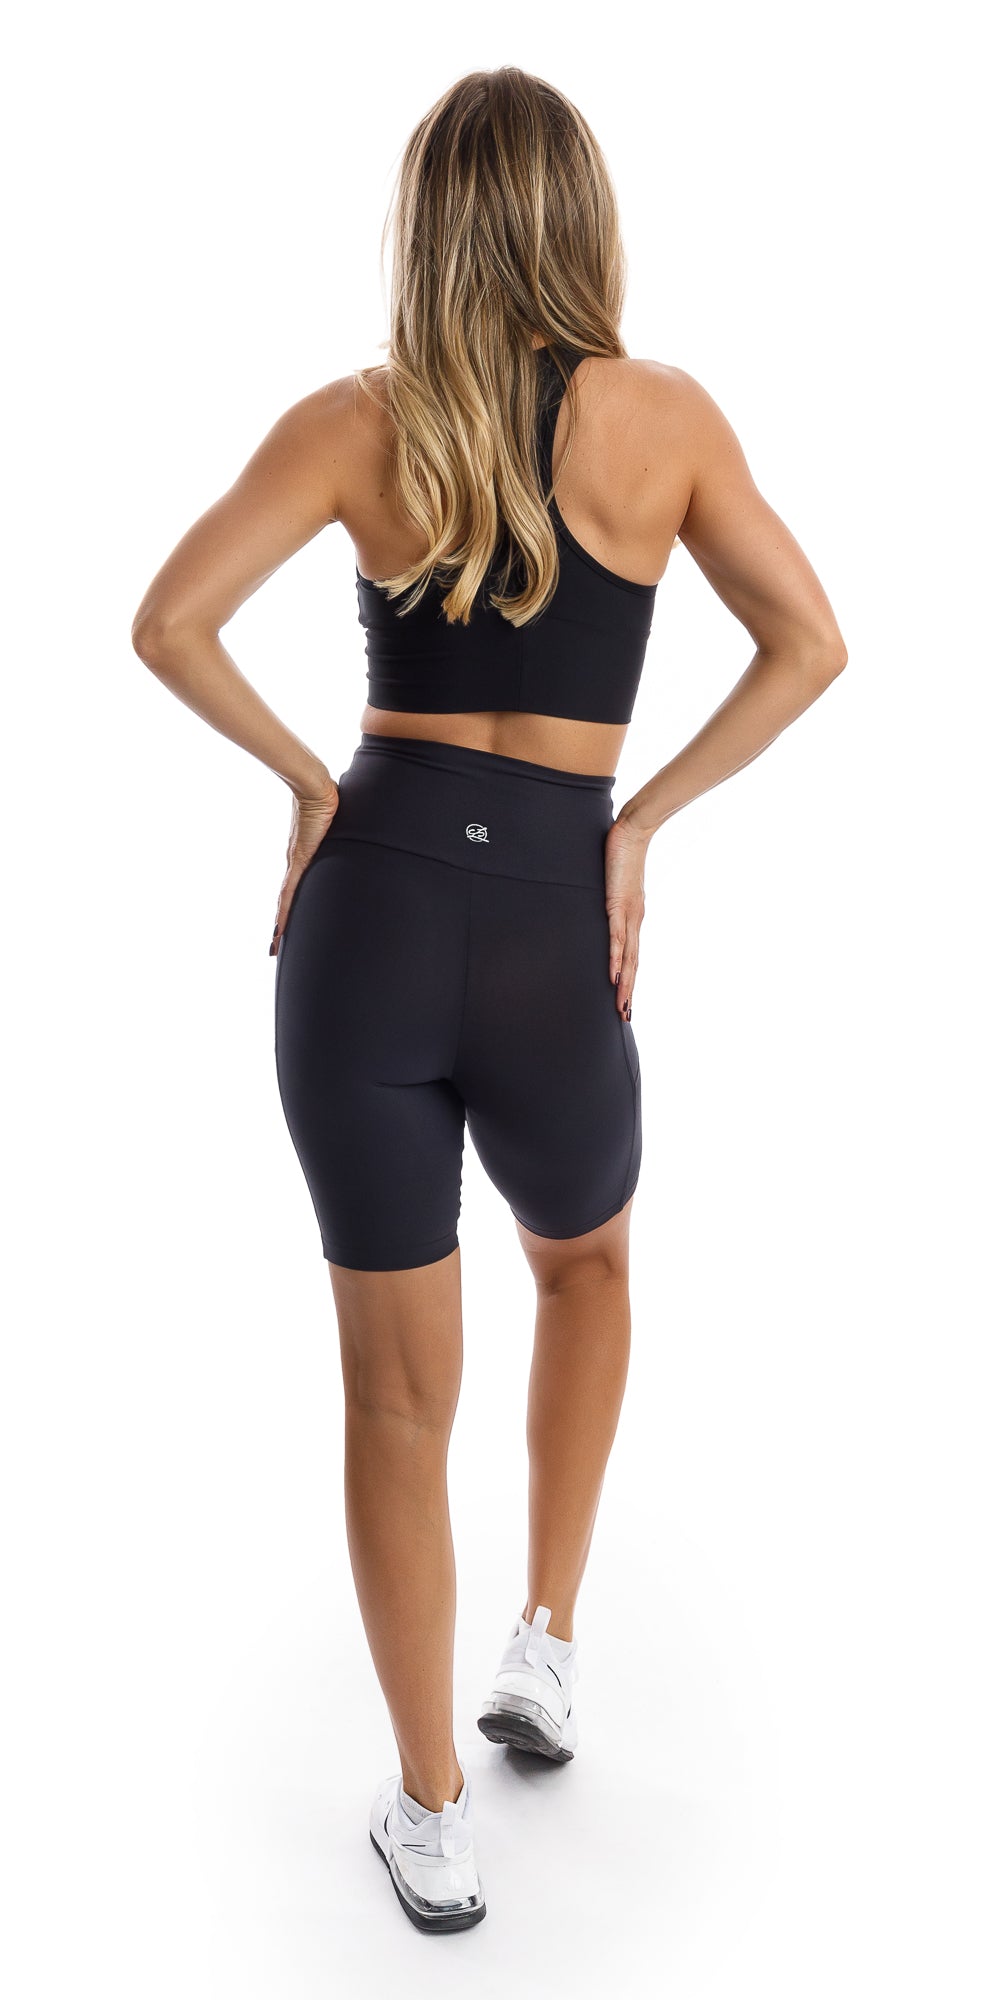 Full body rear view of girl in black Midnight Eco Biker Shorts with Pockets and matching bra putting both hands on waist